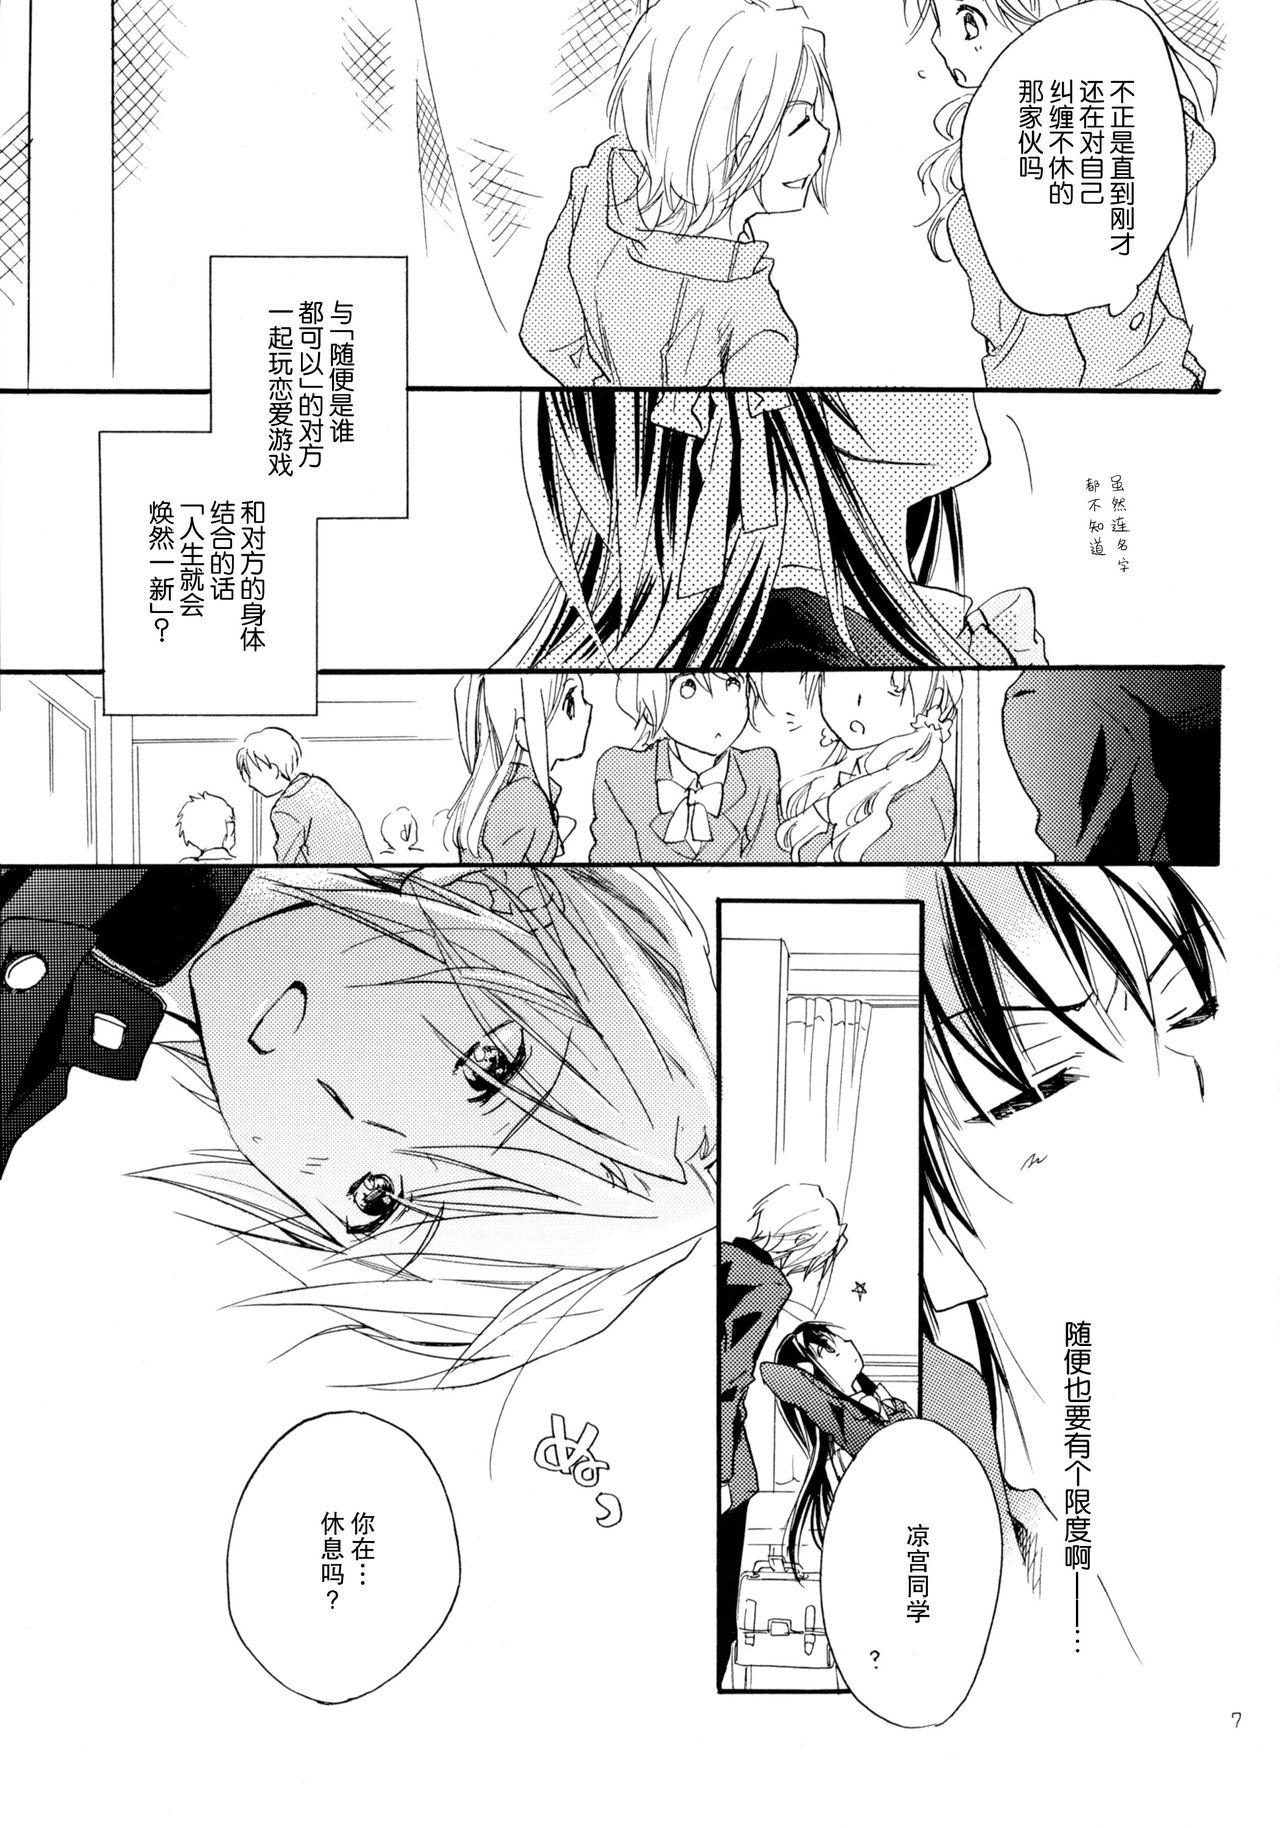 Egypt Star way to Heaven - The melancholy of haruhi suzumiya Unshaved - Page 8